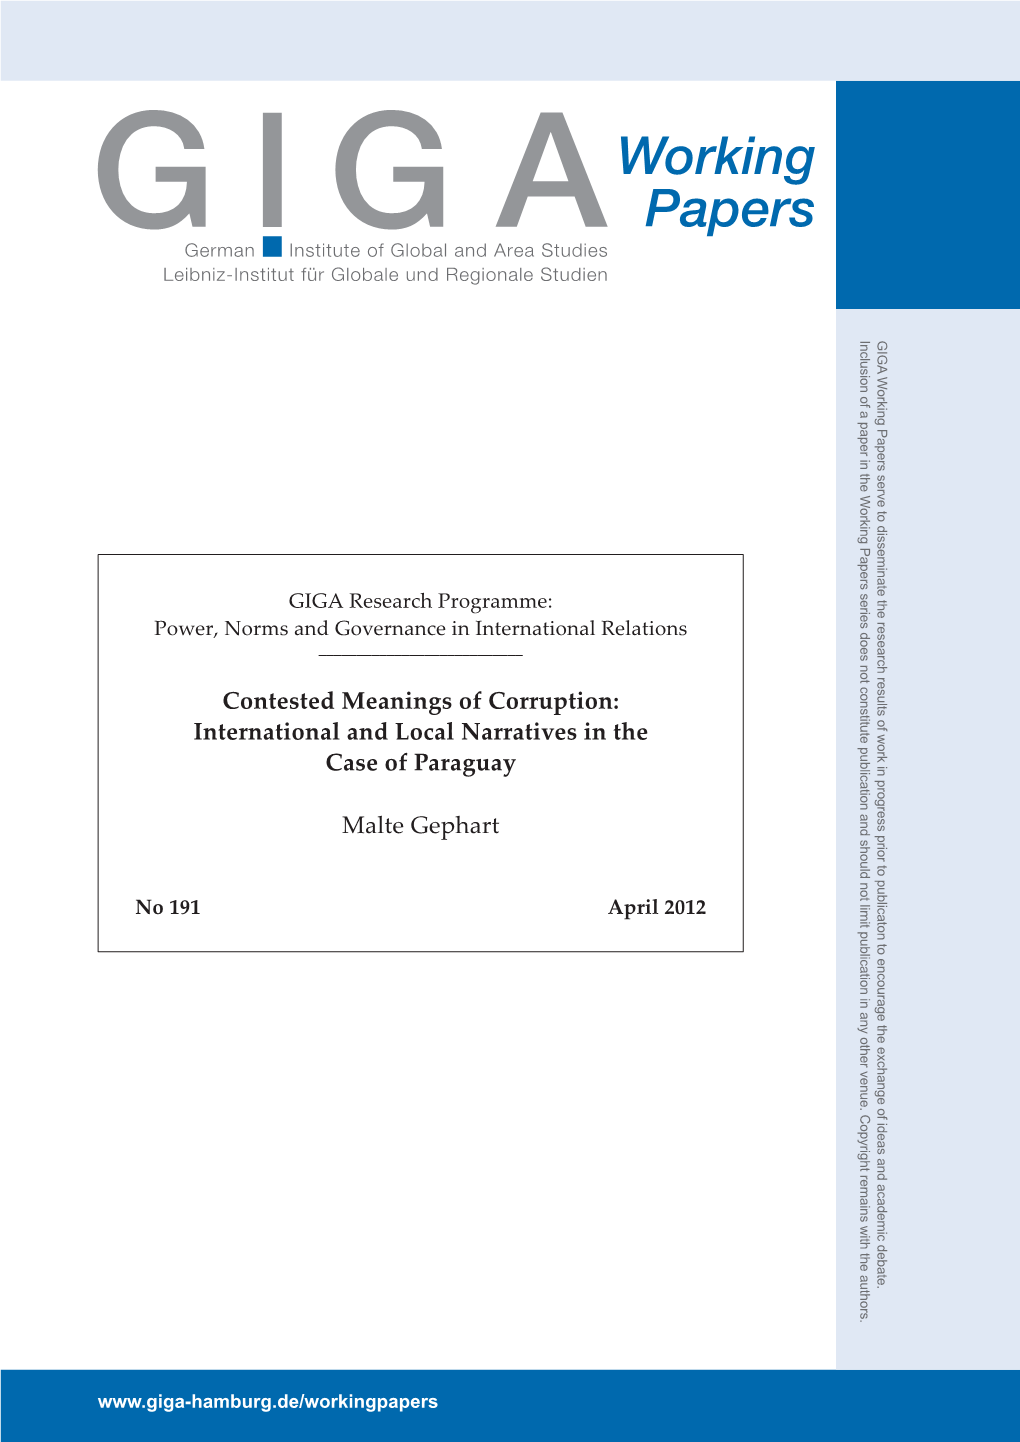 Contested Meanings of Corruption: International and Local Narratives in the Case of Paraguay